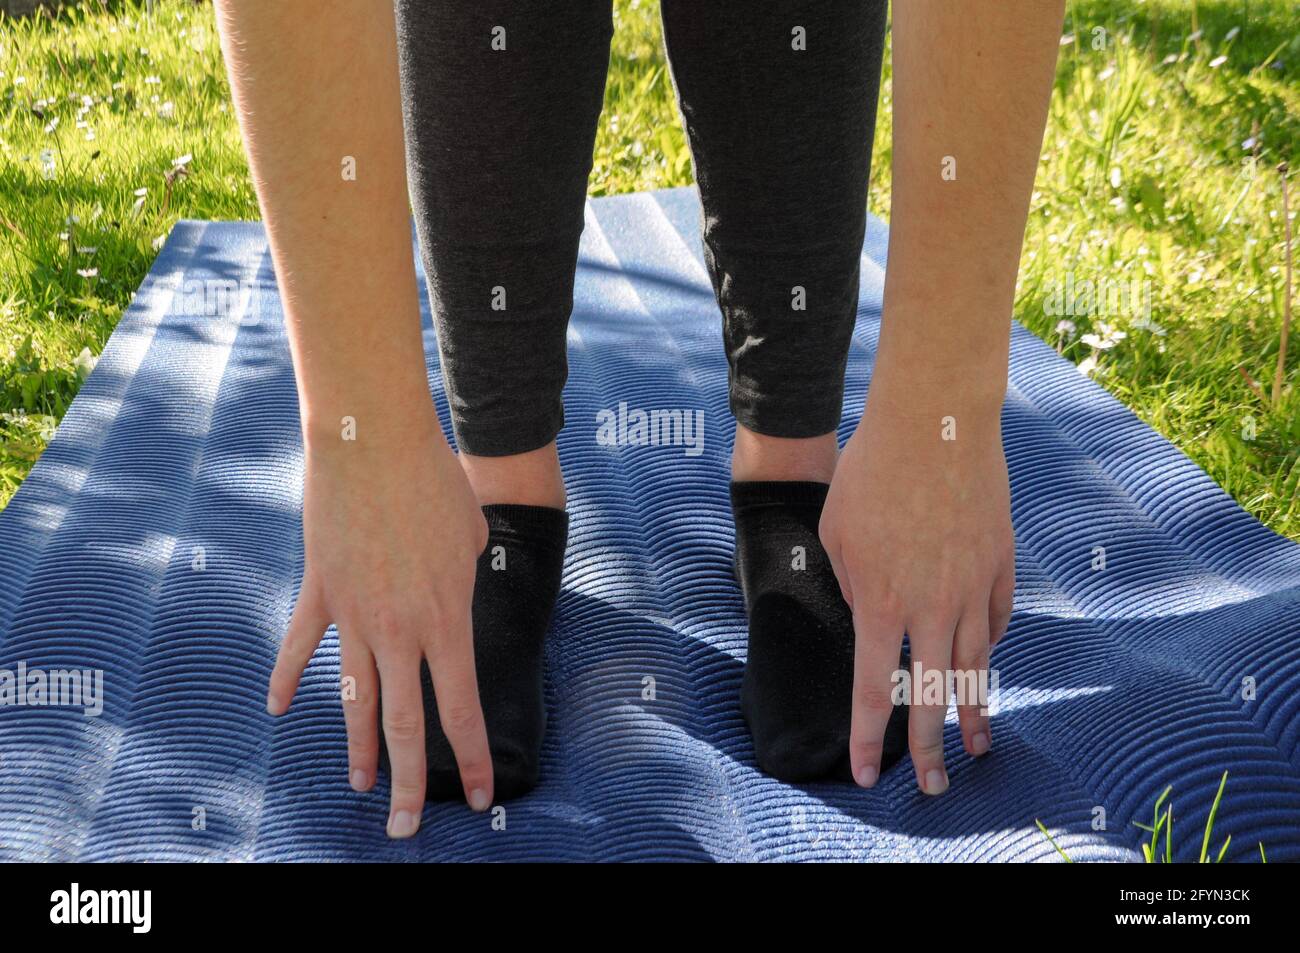 Woman wearing grey leggings and black socks, practicing yoga and stretching on a blue mat on the green grass outdoor Stock Photo